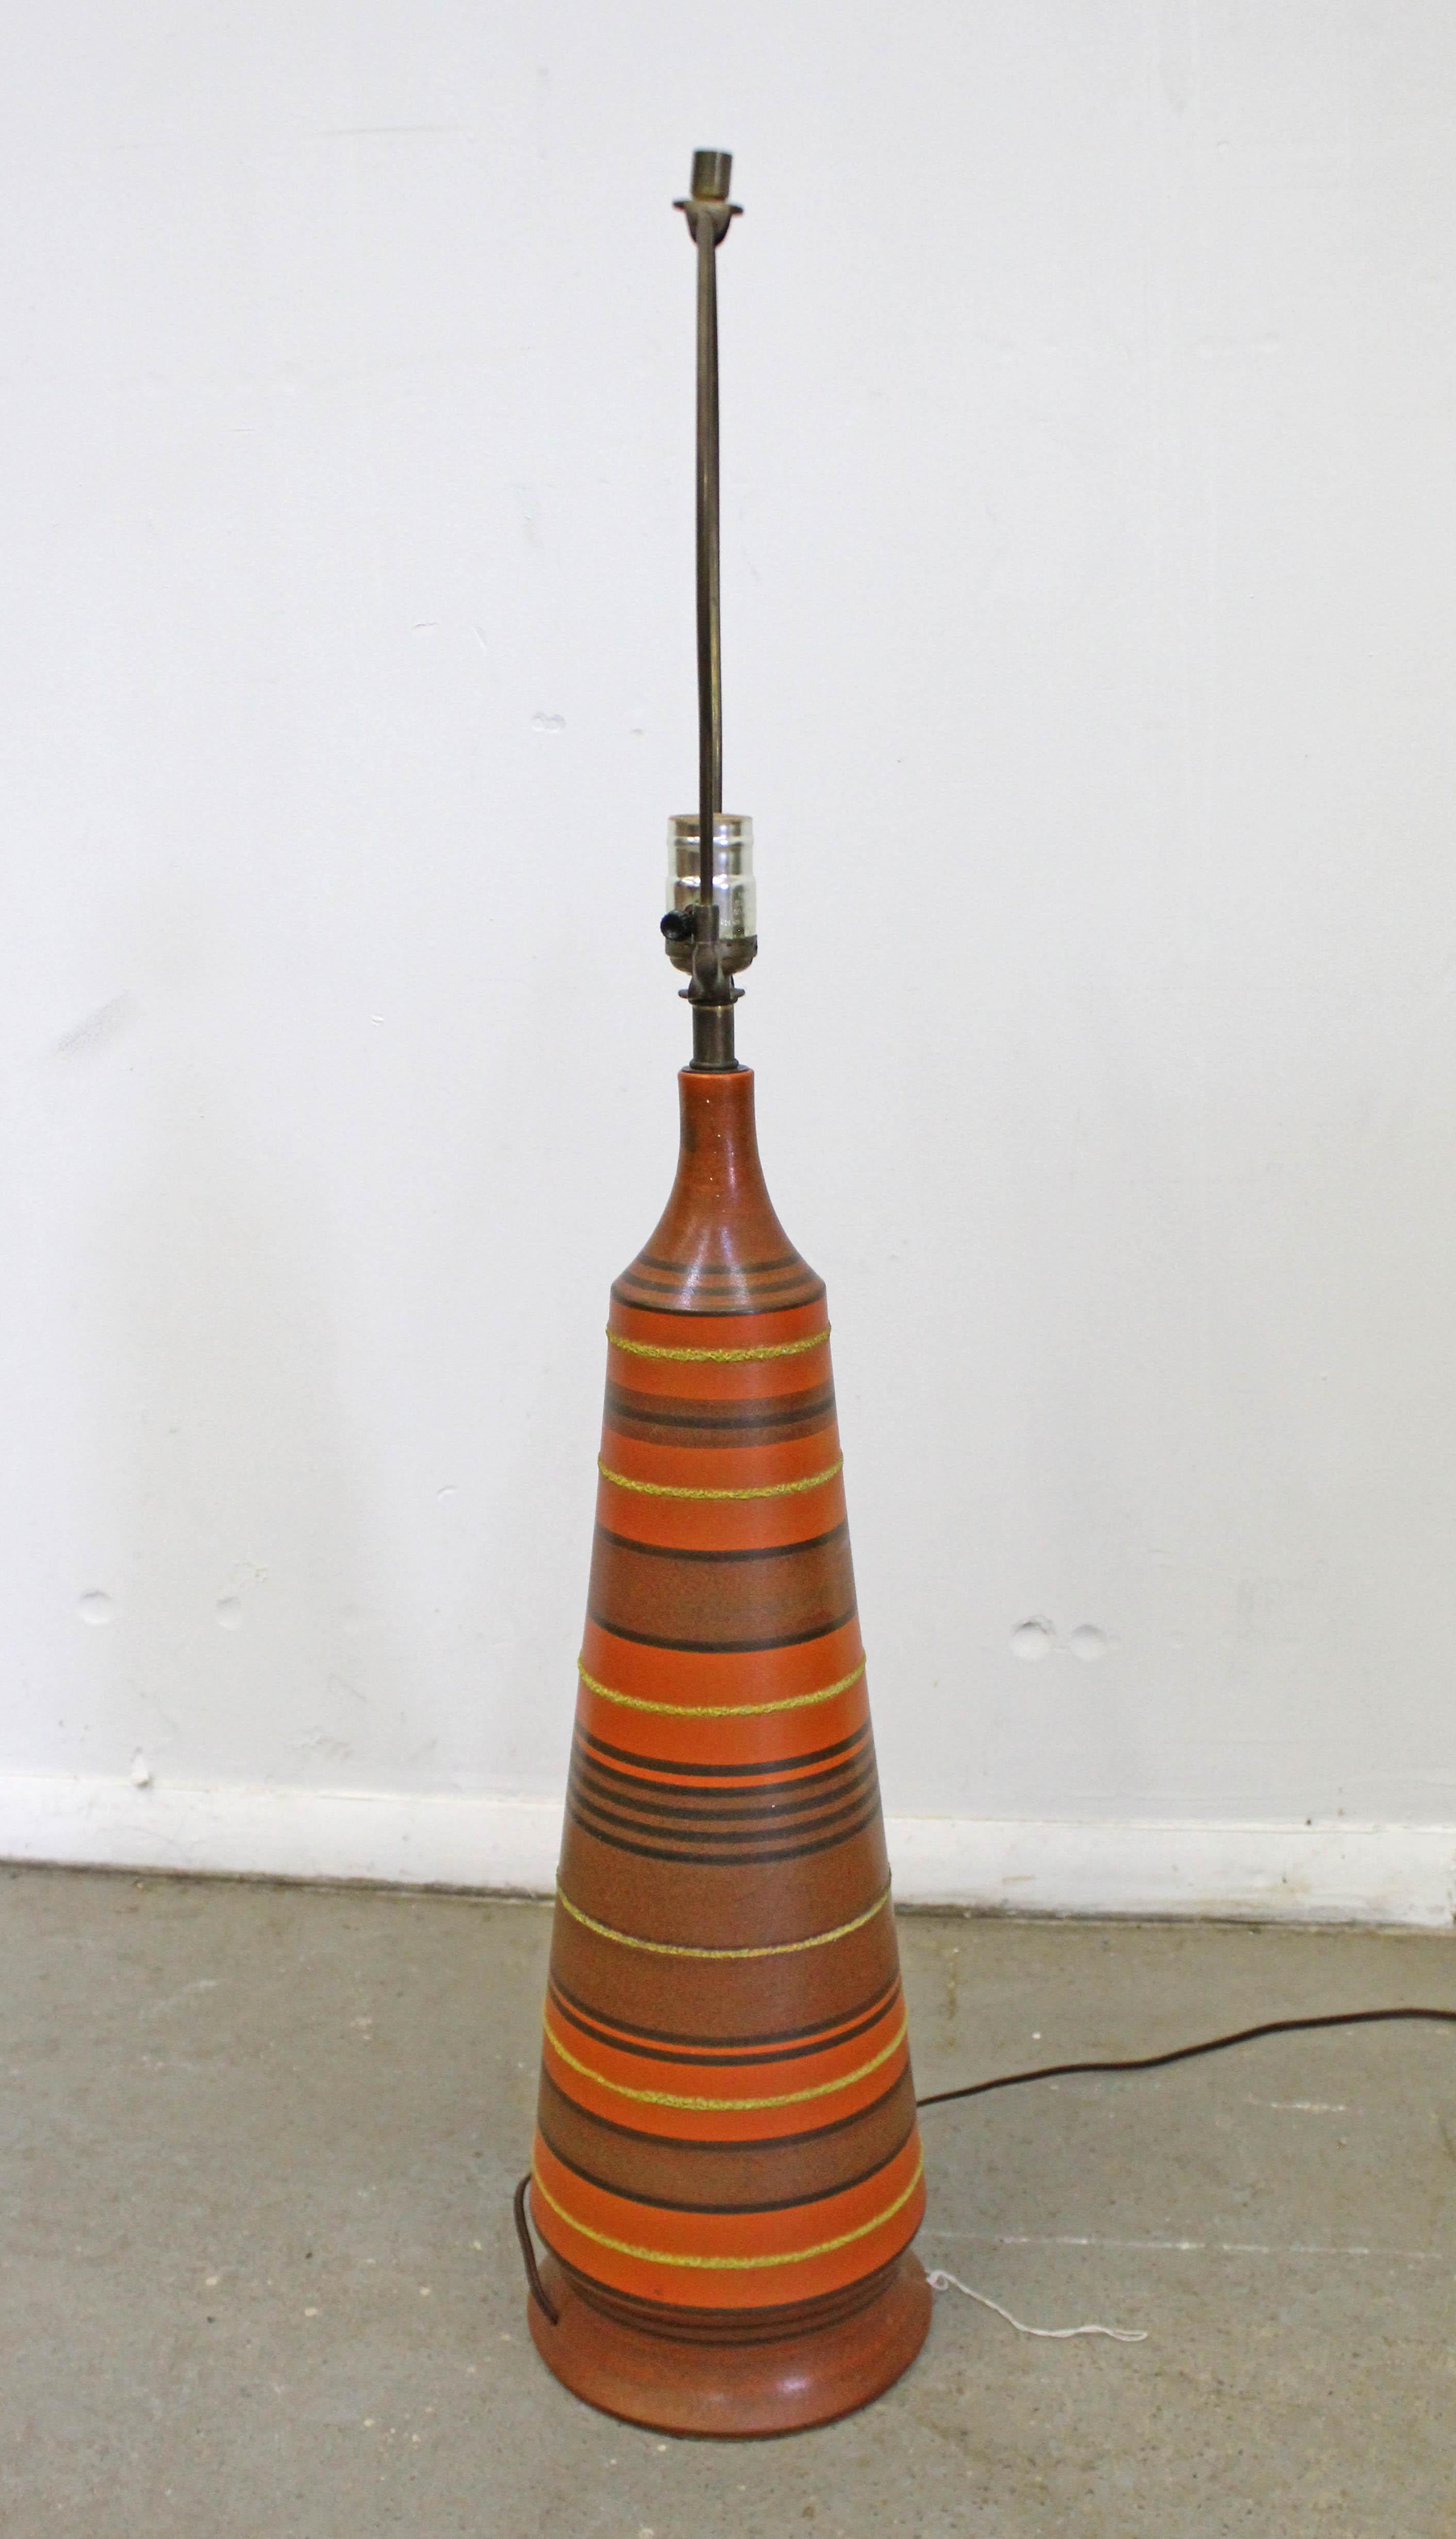 Offered is a vintage Mid-Century Modern table lamp from Italy. This lamp has a retro look with a conular shape, featuring orange pottery with textured stripes. It is in good, working condition given its age with minor marks/scratches on the base and